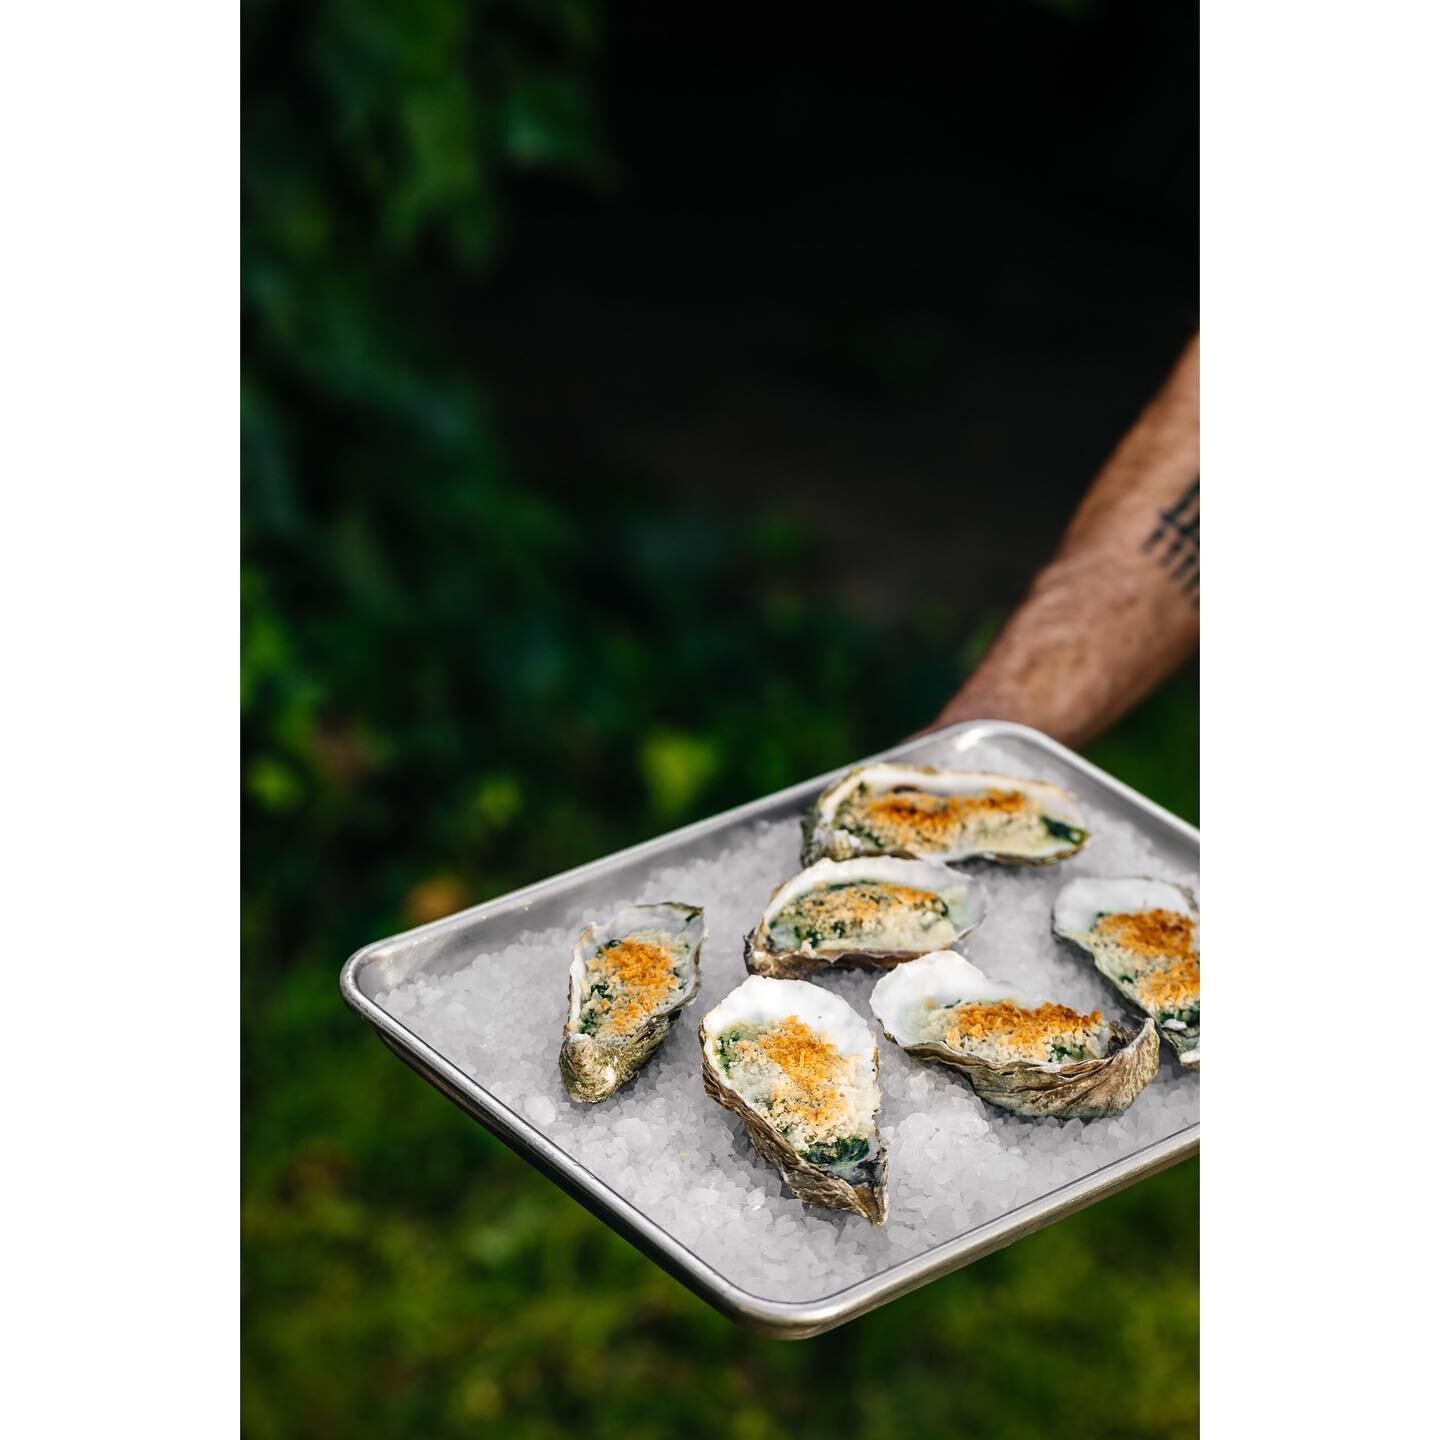 Tomales Bay Oysters Rockefeller 🦪 Hot out of the wood oven 🔥
.
.
.
#bryanjonescatering #privatechef #catering #oysters #oystersrockefeller #sonoma #sonomavalley #boutiquecatering #sonomafoodies #sonomafood #sonomacatering #sonomachef